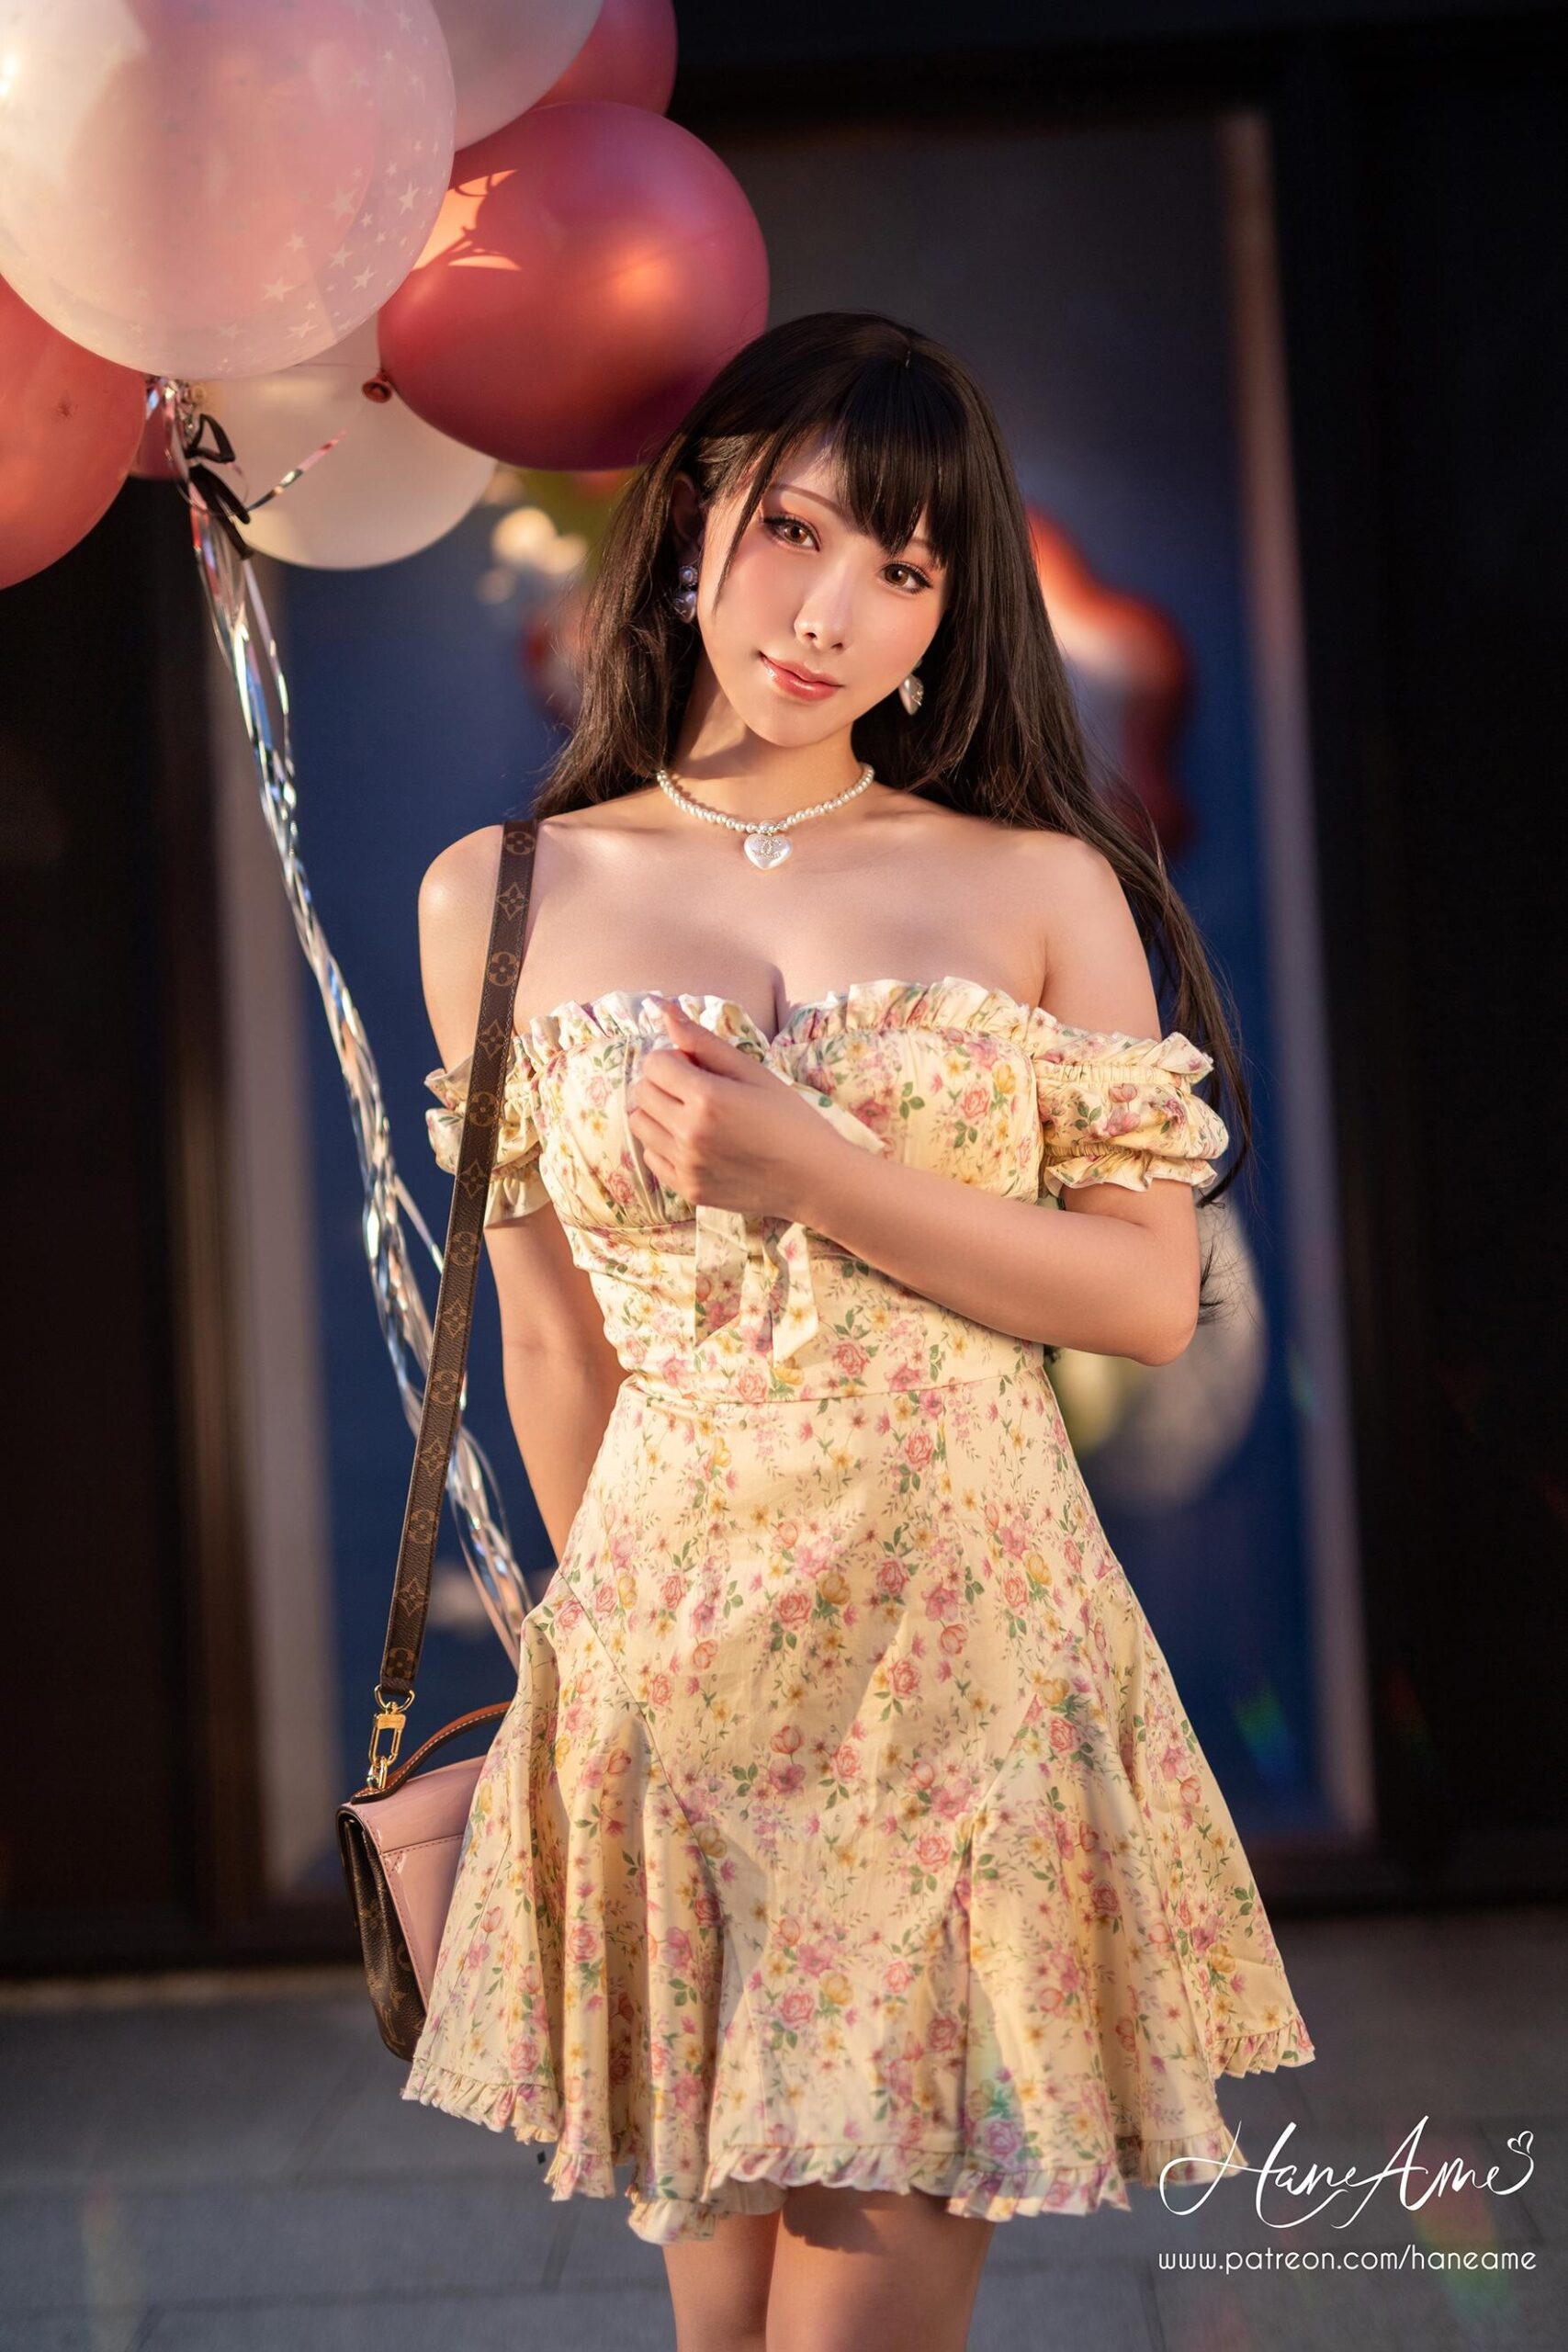 This is the sample picture from HaneAme雨波 - Balloon post. Click here to see image full size.